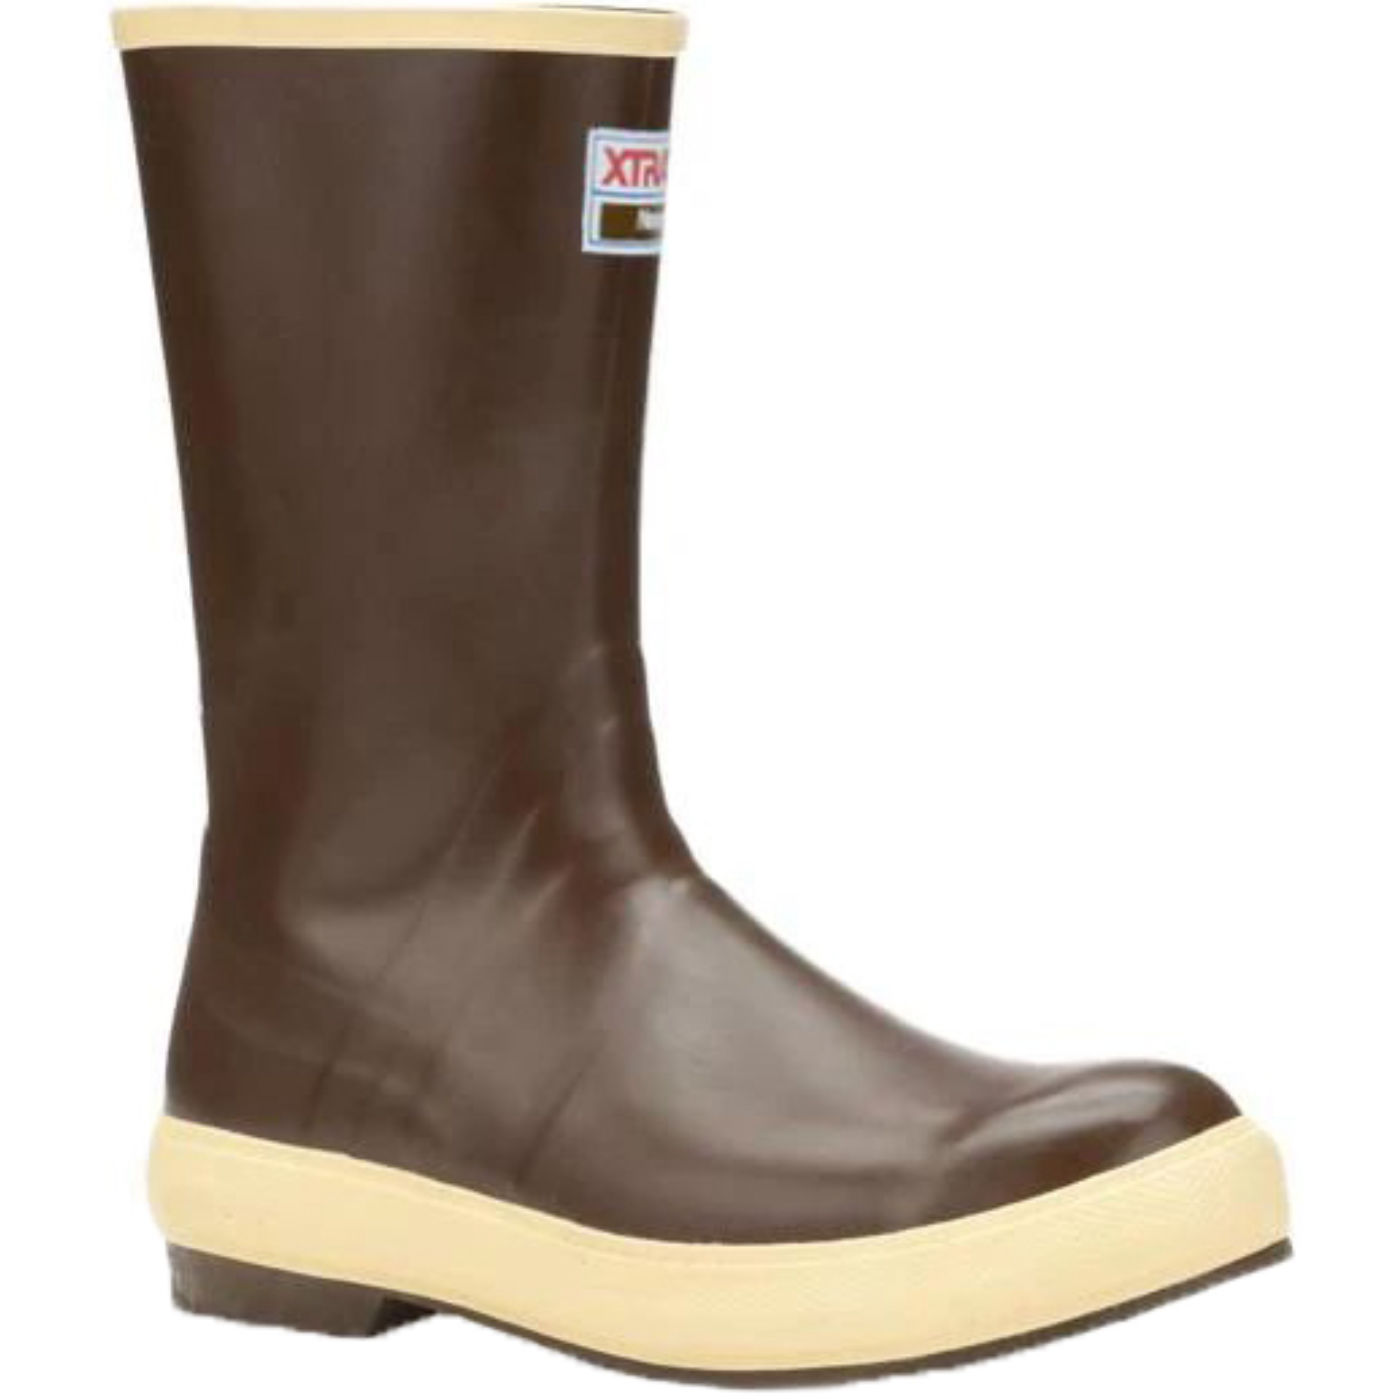 Men's 12 in Legacy Boot Size 10(M) - image 1 of 7